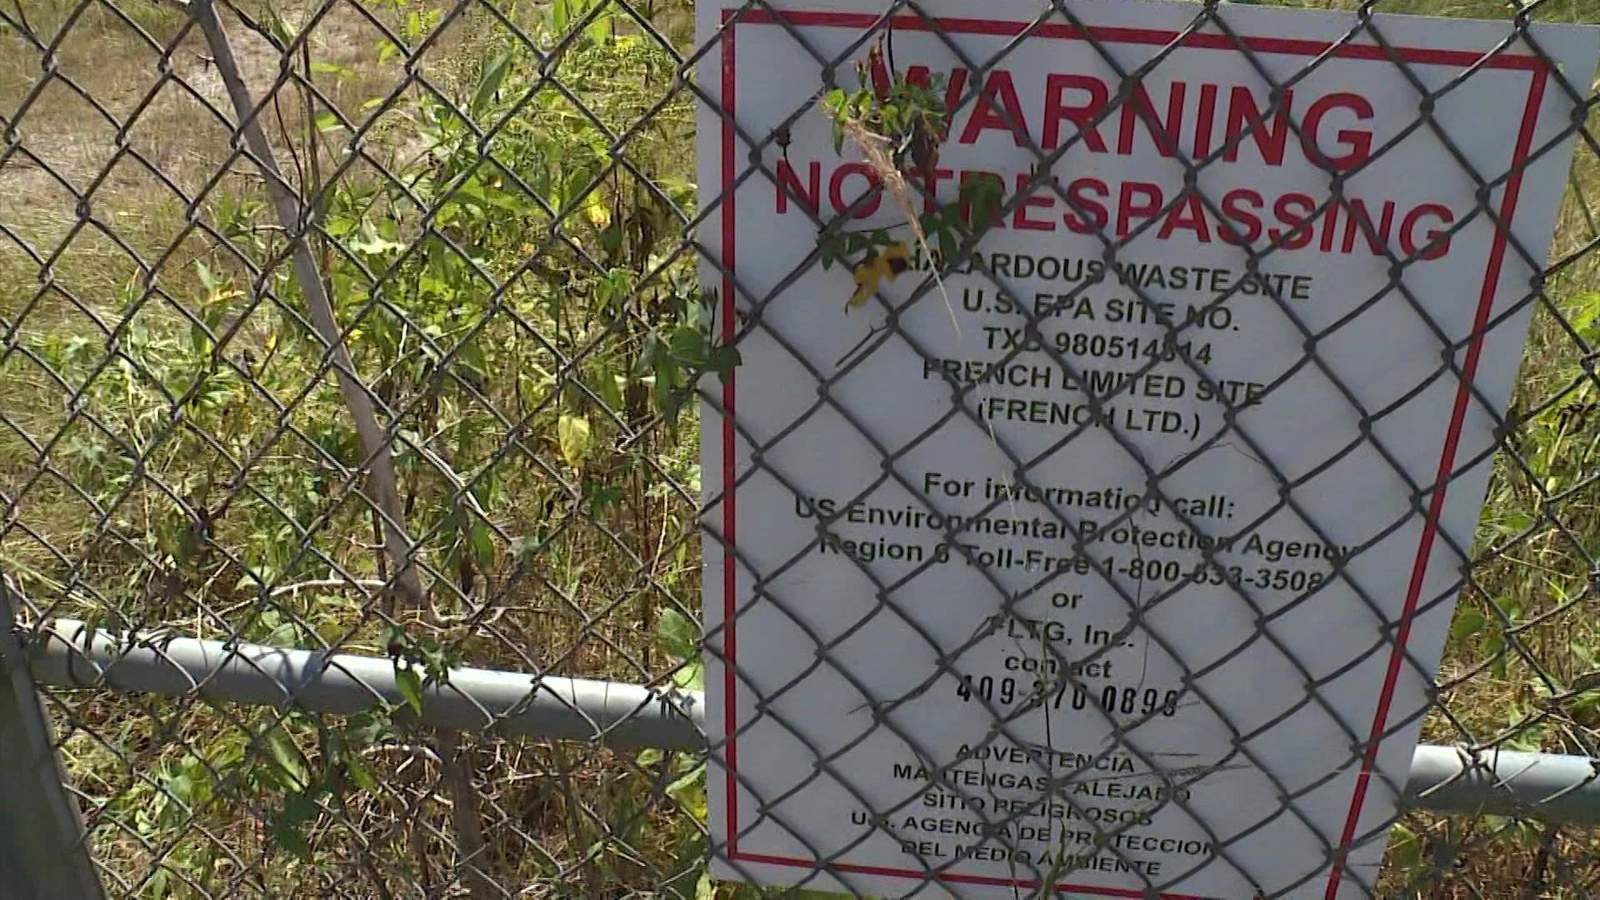 This Harris County Superfund site is ‘vulnerable’ to flooding